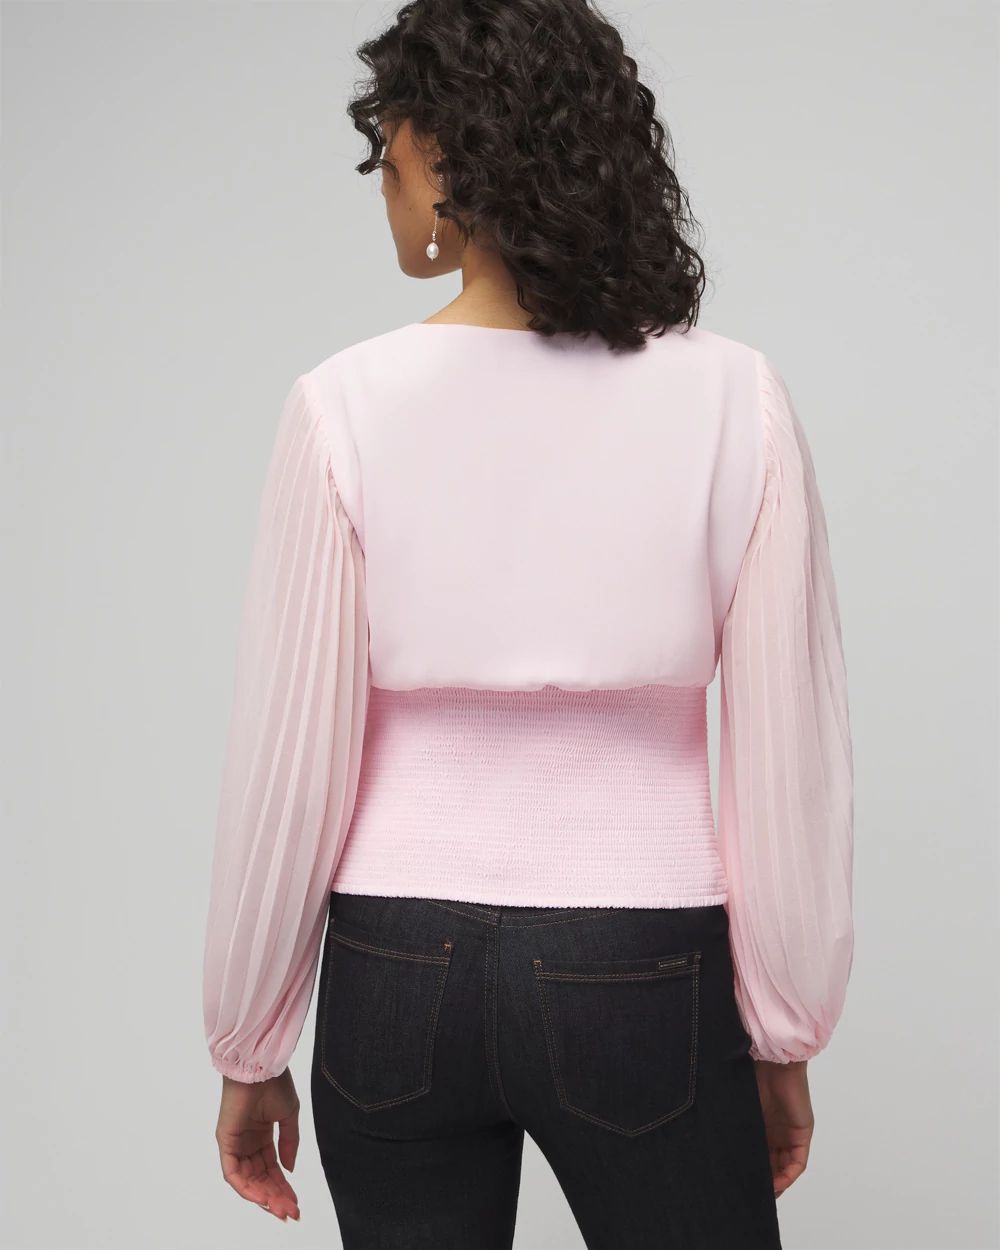 Long Sleeve Pleated Crepe Blouse click to view larger image.